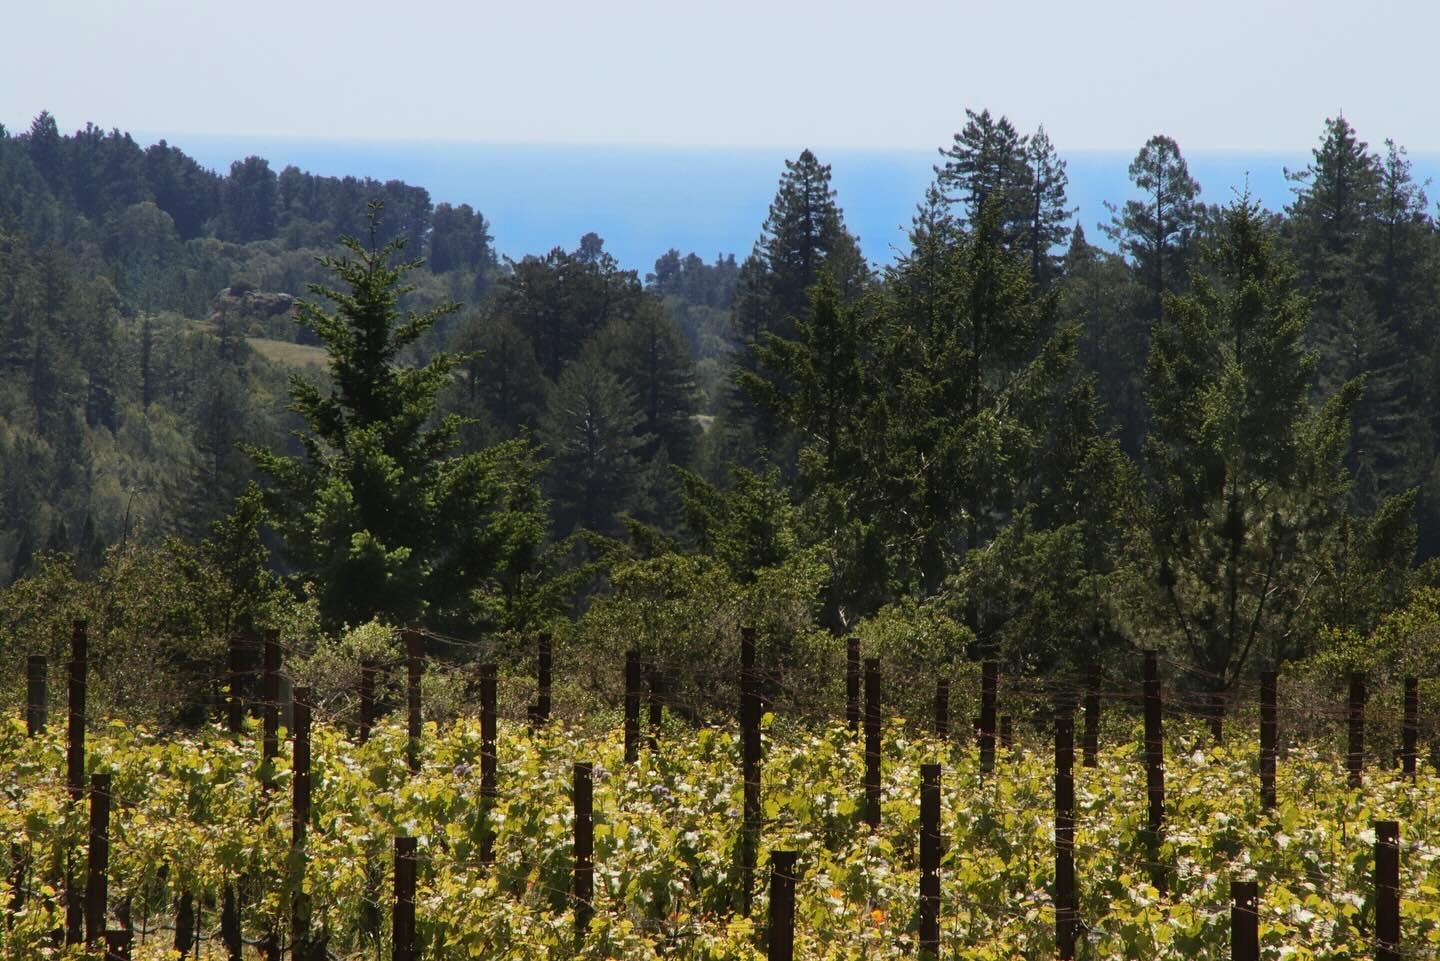 Yesterday&rsquo;s visit to our vineyards provided a rare beautiful sight of the Pacific Ocean which is usually veiled by fog and haze. Which vineyard view do you prefer?
#westsonomacoastvintners #westsonomacoast